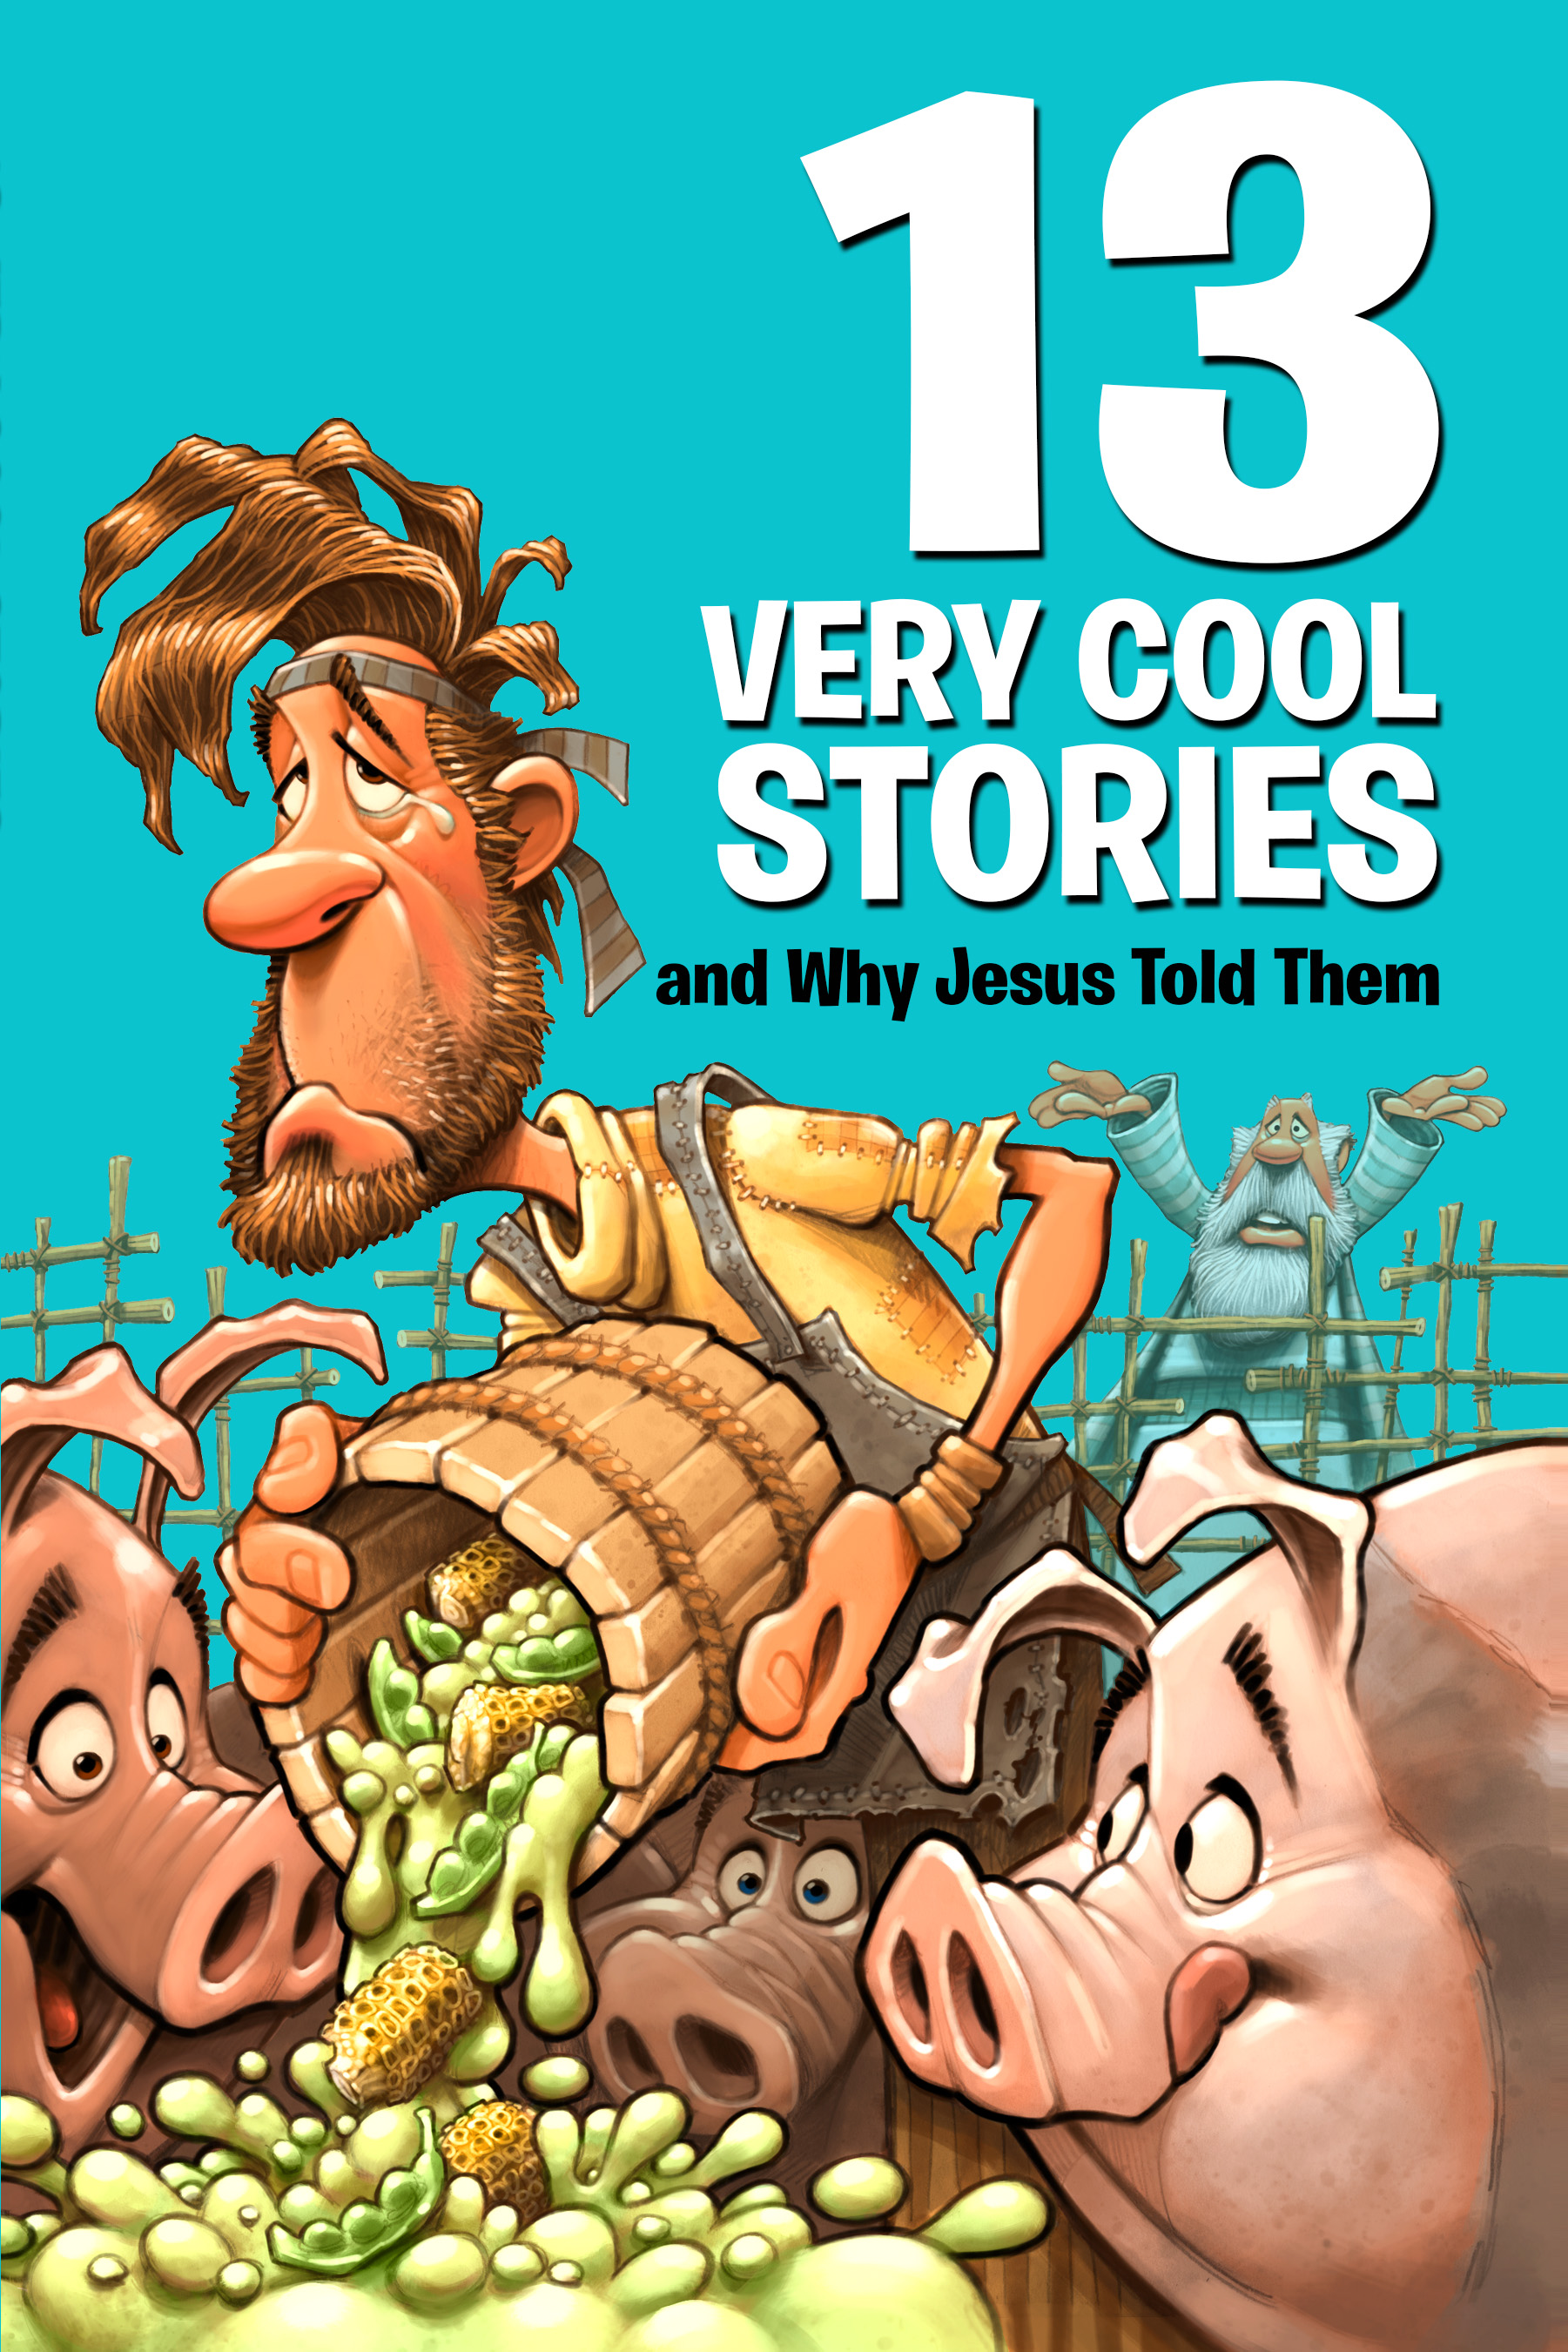 13 Very Cool Stories and Why Jesus Told Them